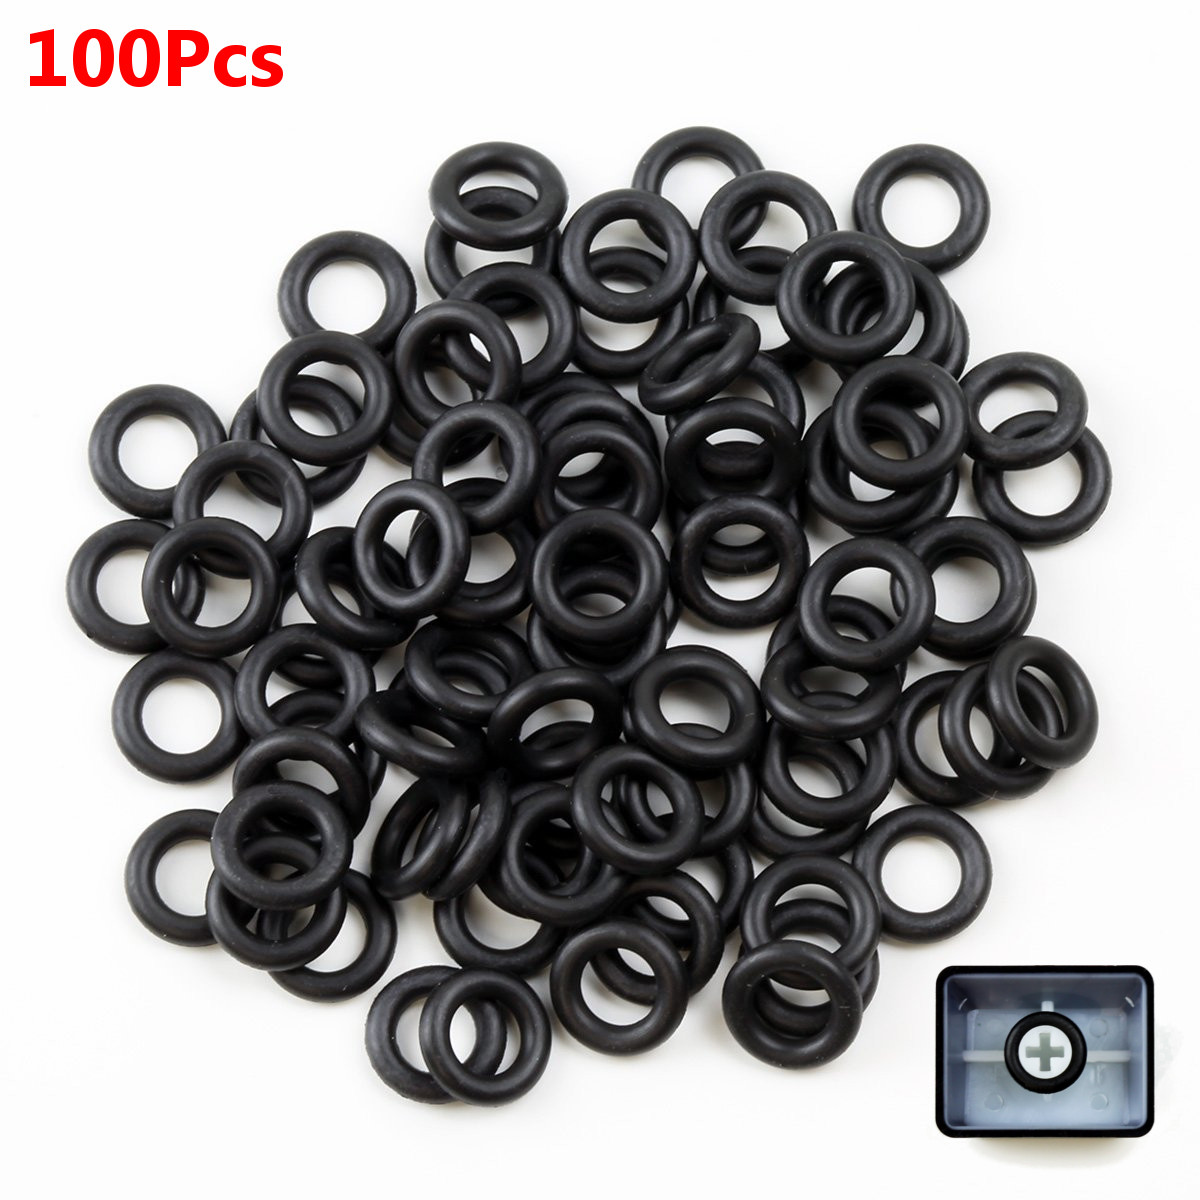 100 Mechanical Keyboard Keycap Rubber O-Ring Switch Dampeners for Cherry MX 44